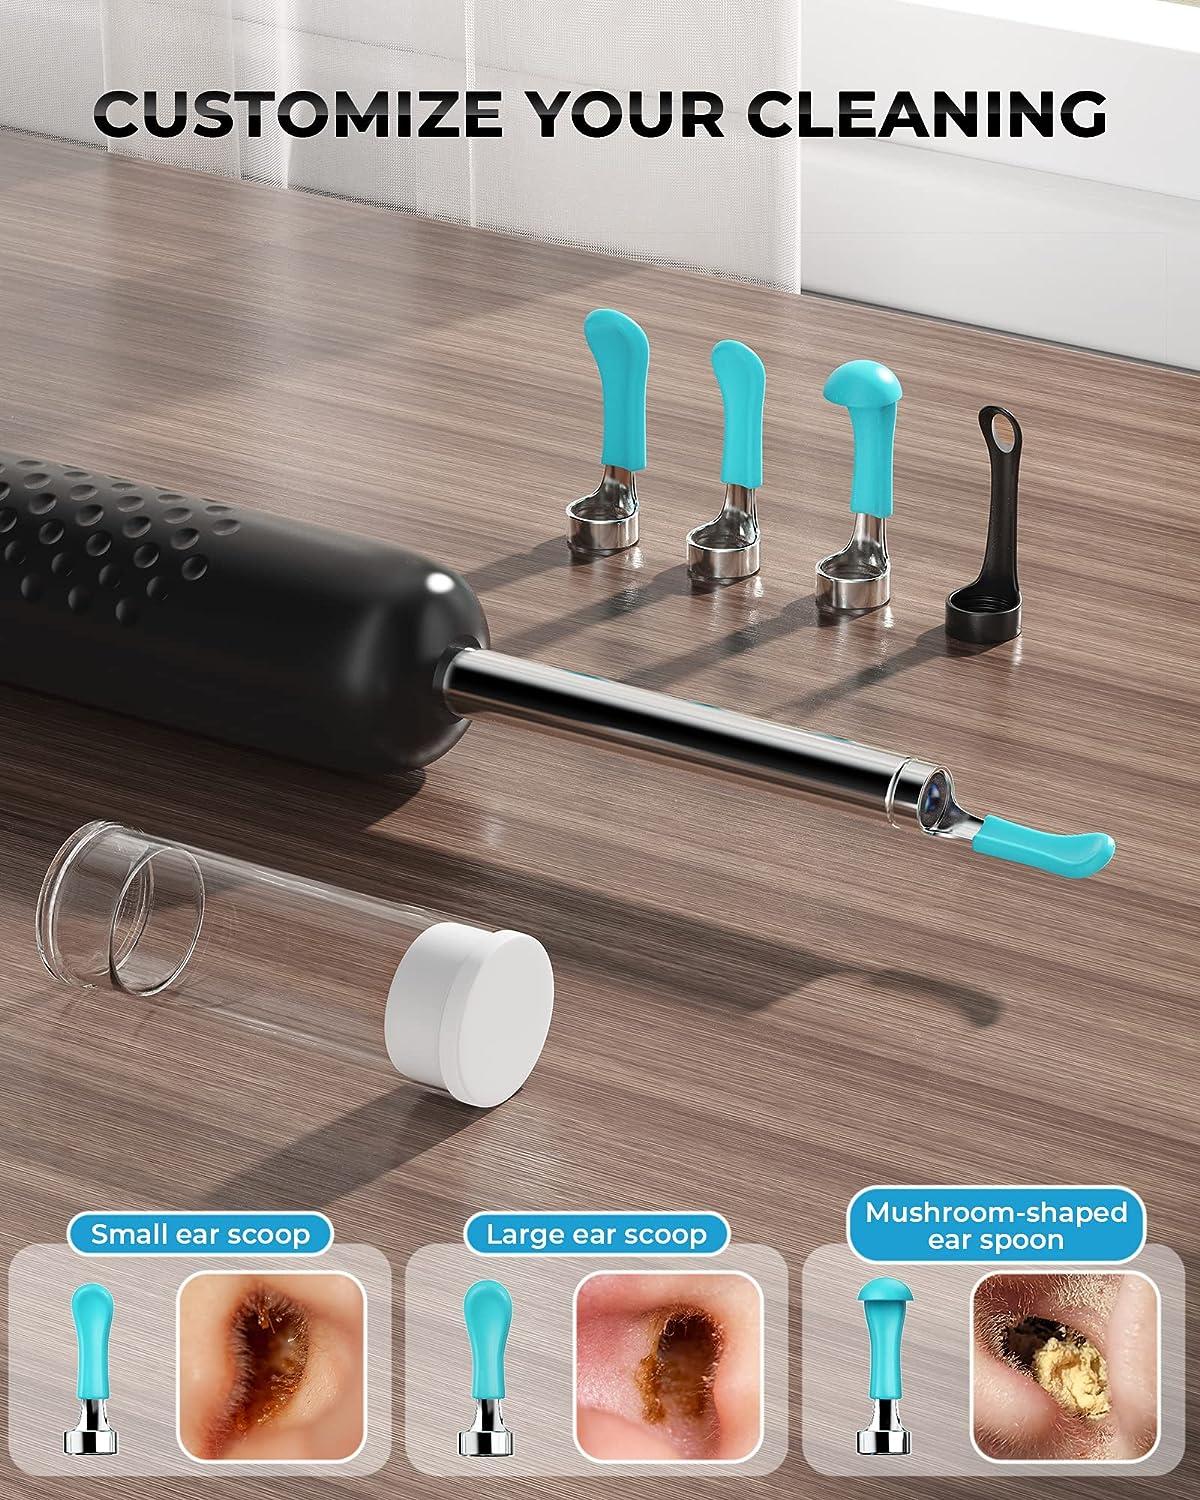 Yumika Ear Wax Removal Tool, Cleaner with 1080P HD Camera, Kit 7 PCS Set,  Wireless Otoscope 6 Lights, for iPhone, iPad, Android Smart Phones（Black）